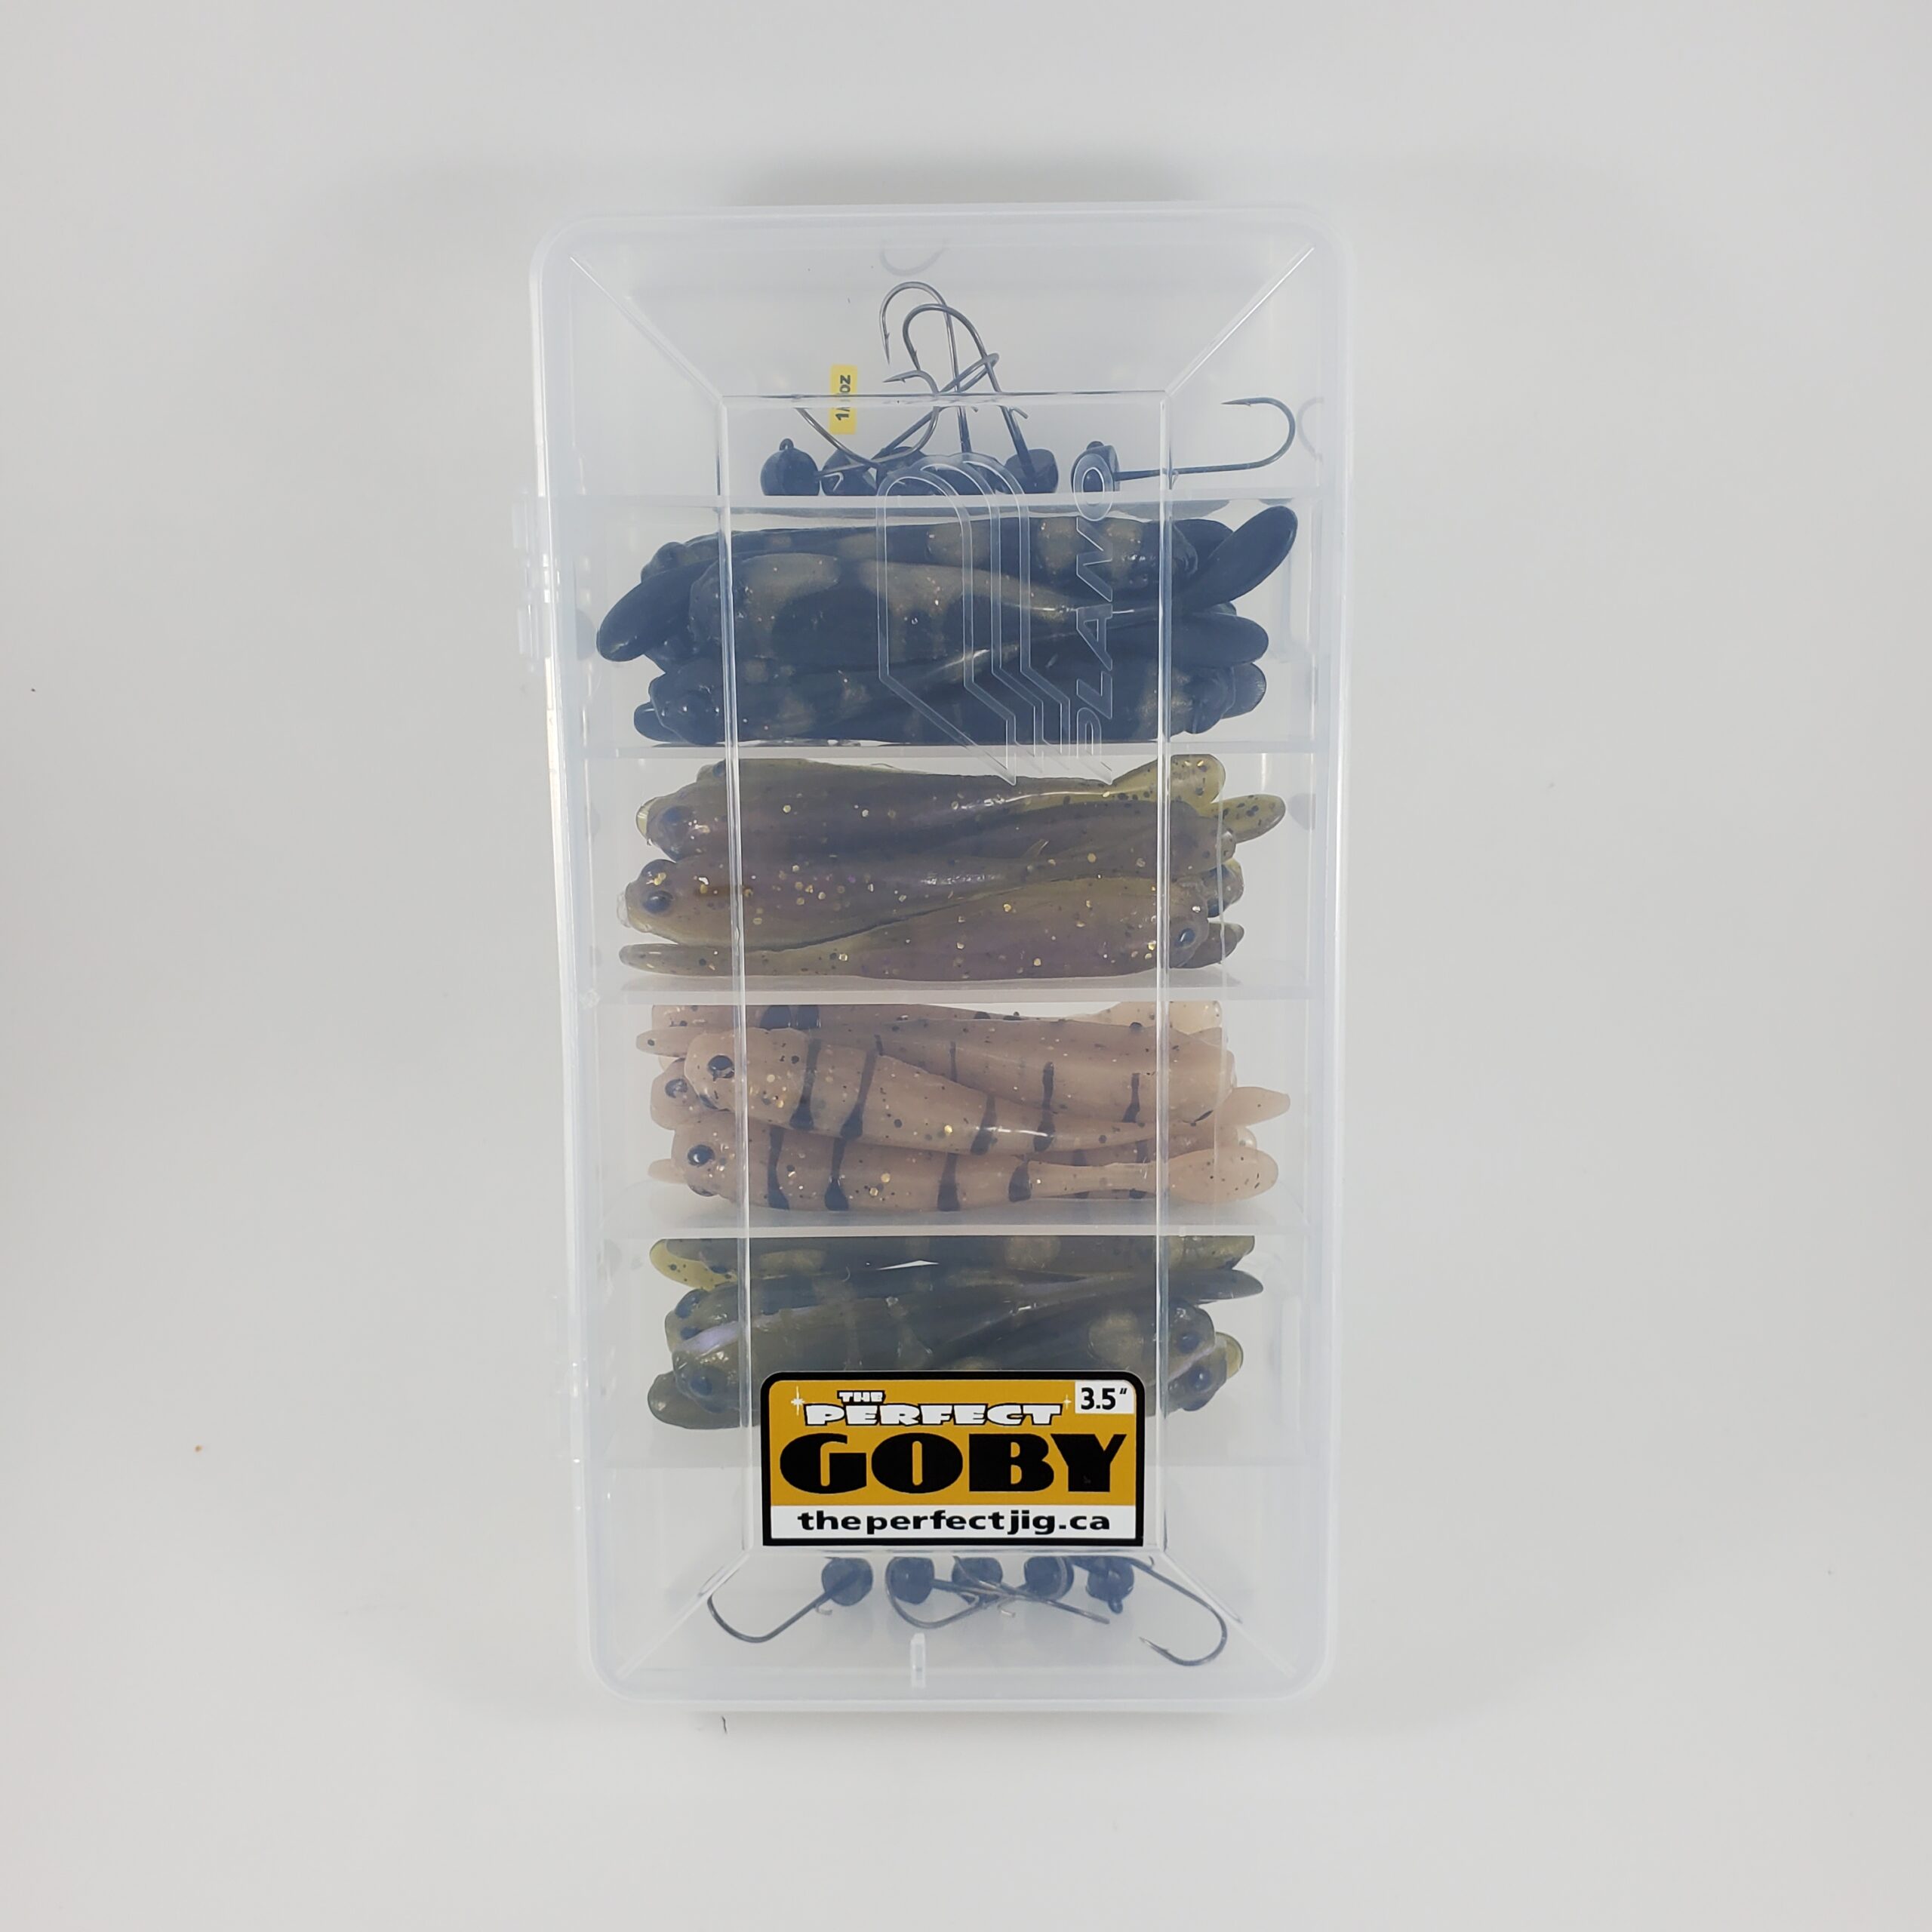 The Perfect Goby Kit